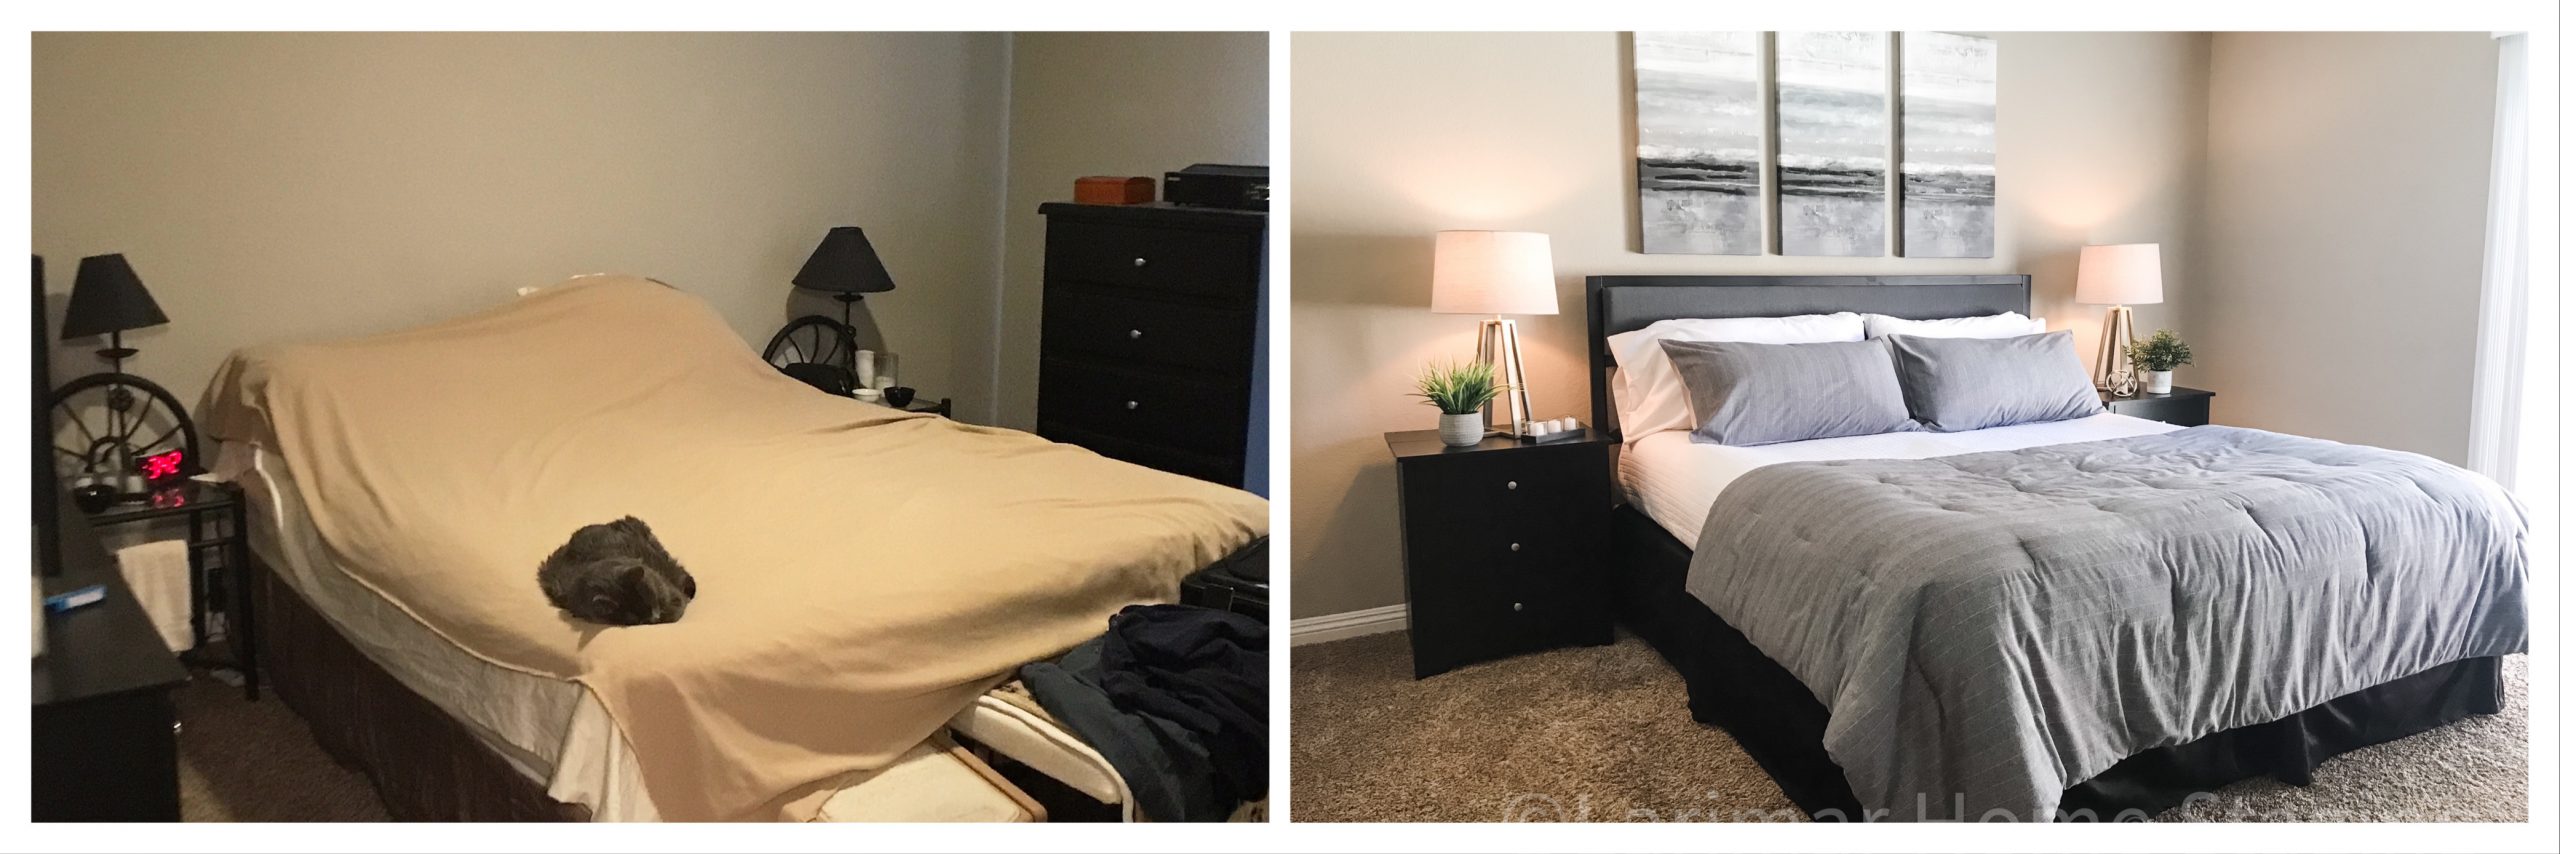 Before and After a Home Staging Consultation